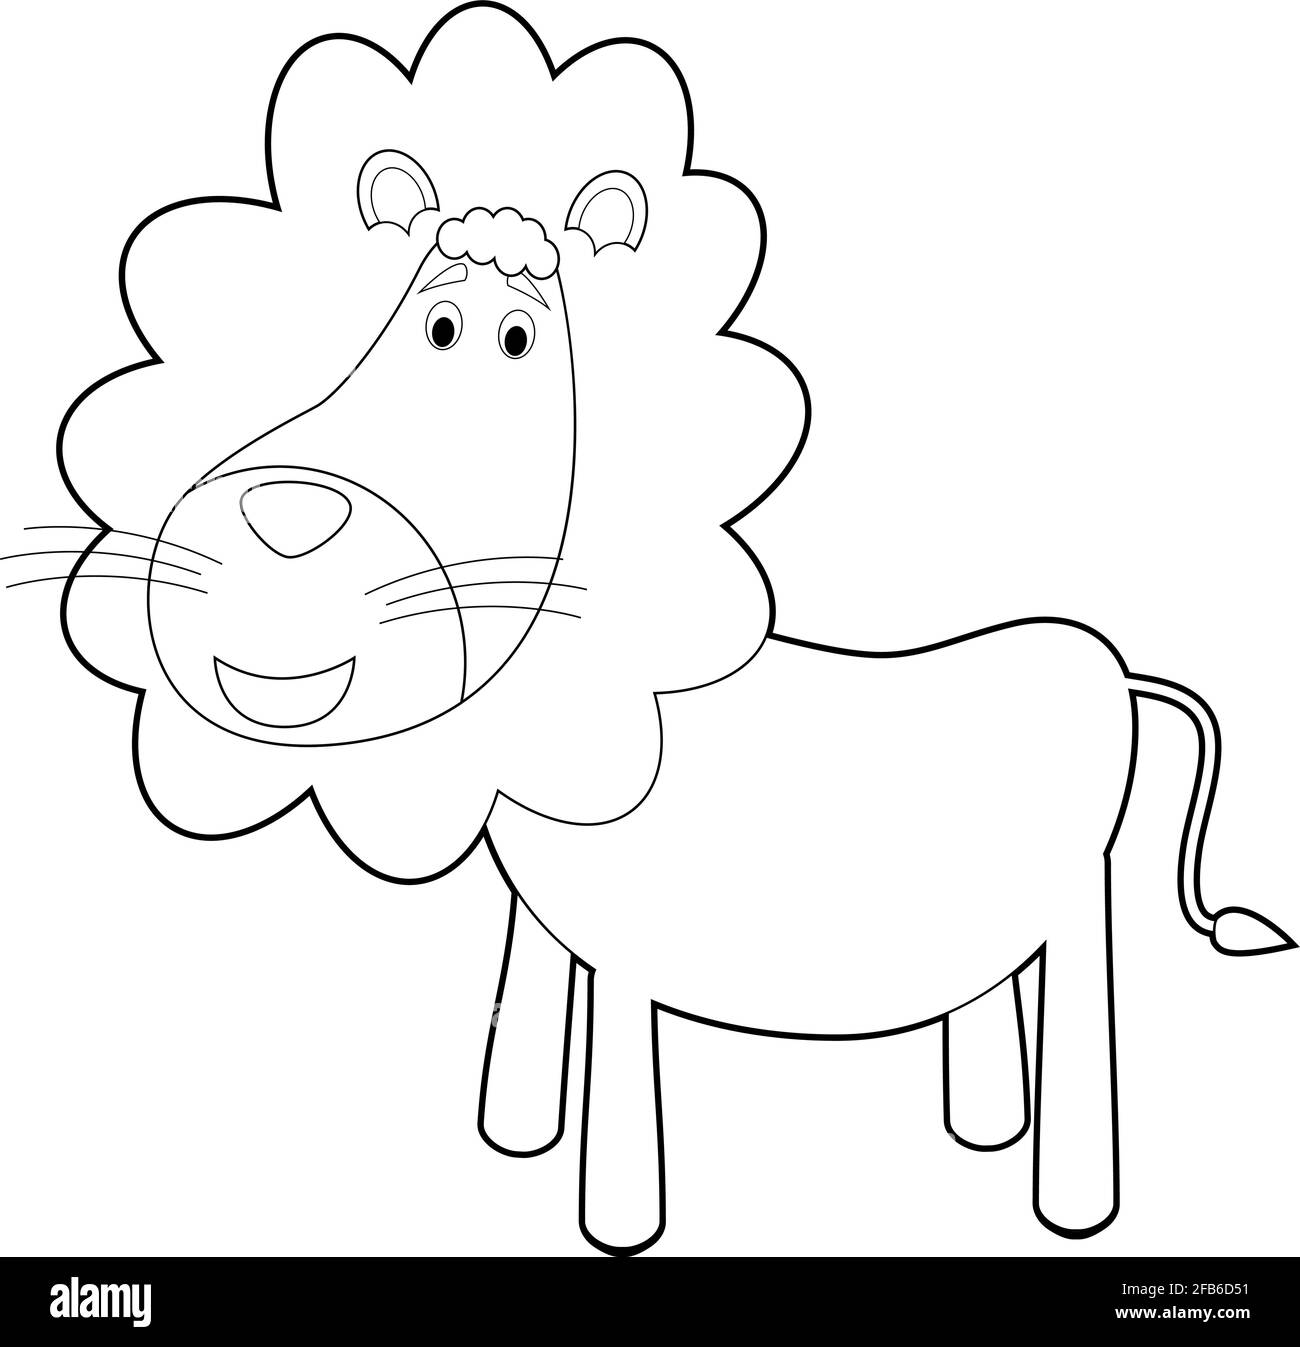 A great king akbar coloring pages | Coloring pages, Printable coloring  pages, Coloring books